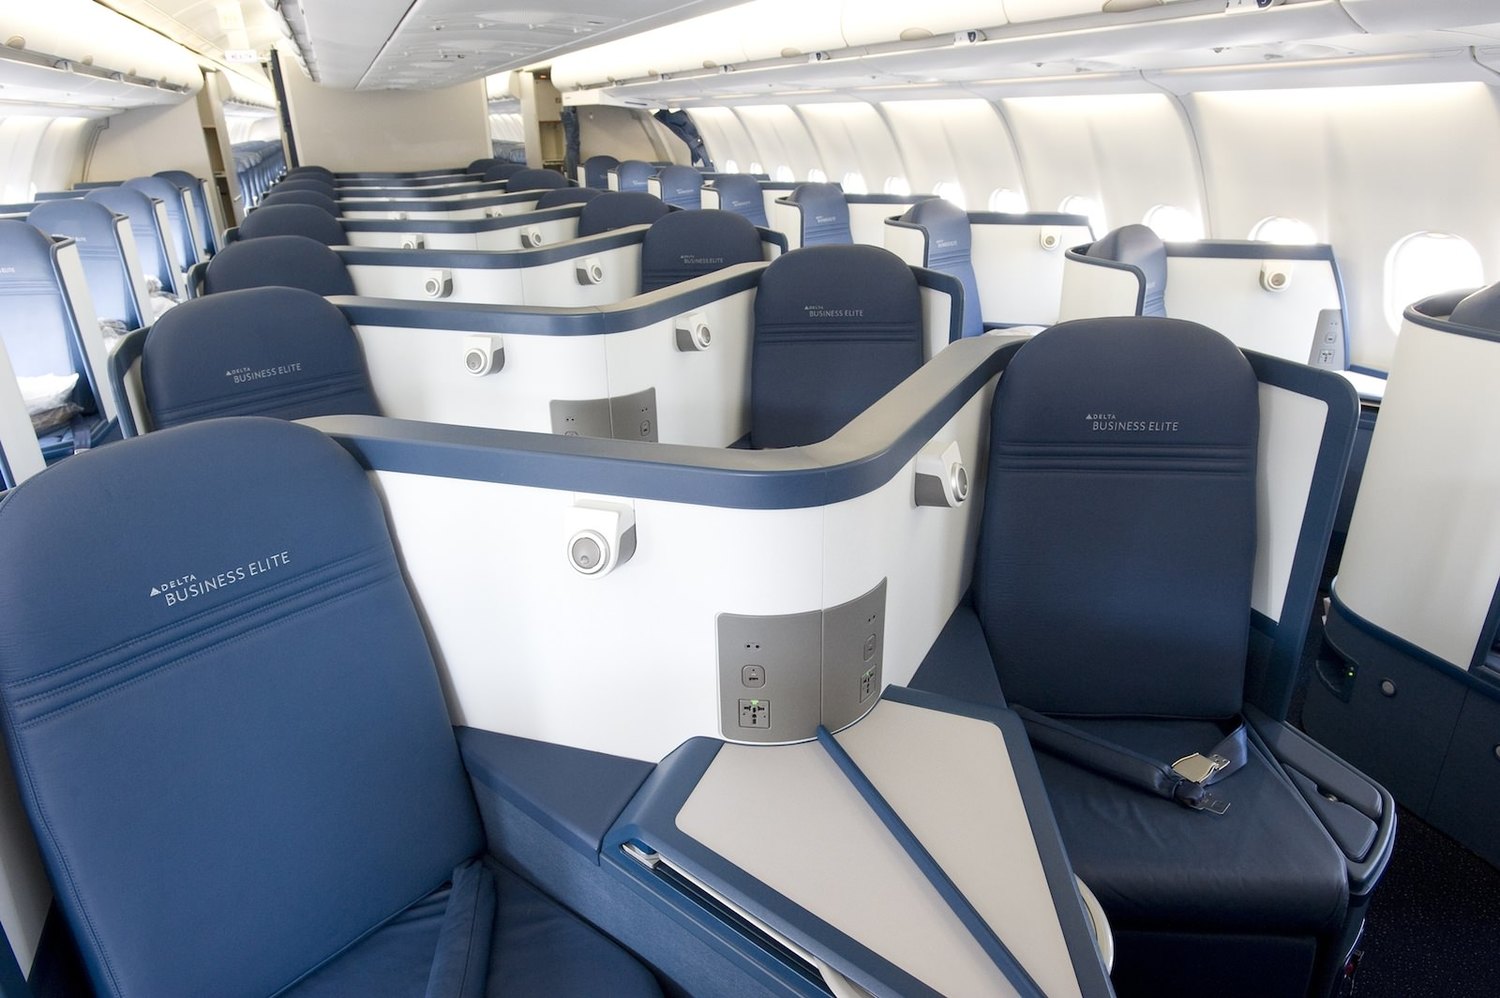 Delta One Seats Airbus A330 300 Elcho Table